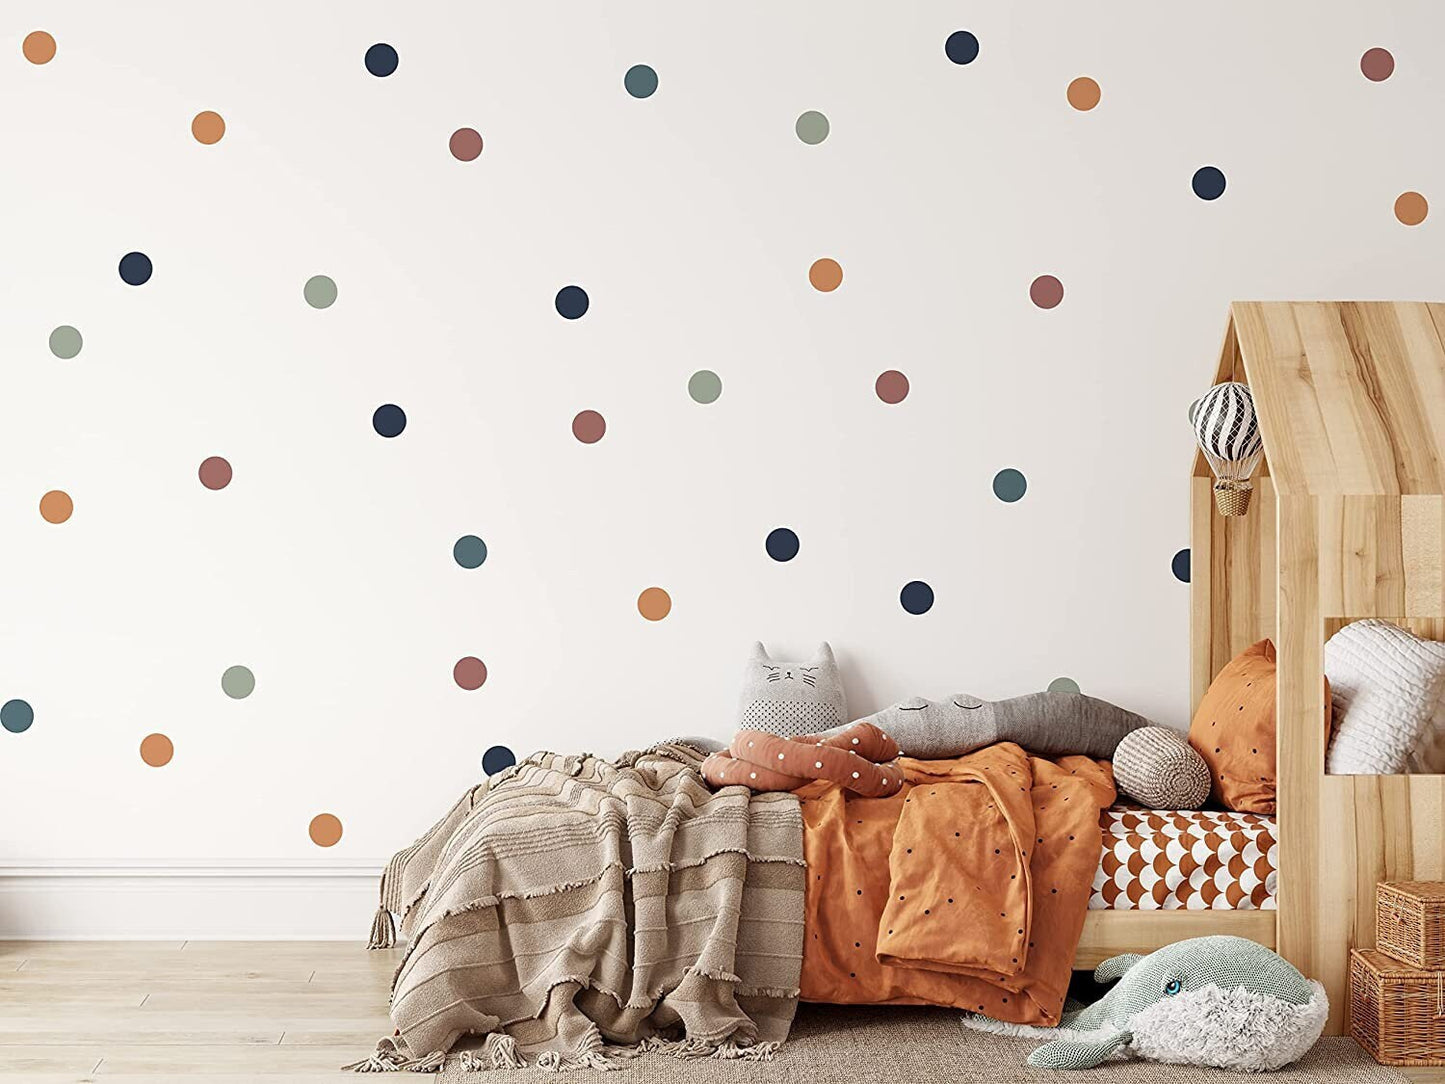 Removable Boho Chic Polka Dot Wall Stickers Decals Chic Wall Art For Home Nursery Kids Rooms Children's Decor